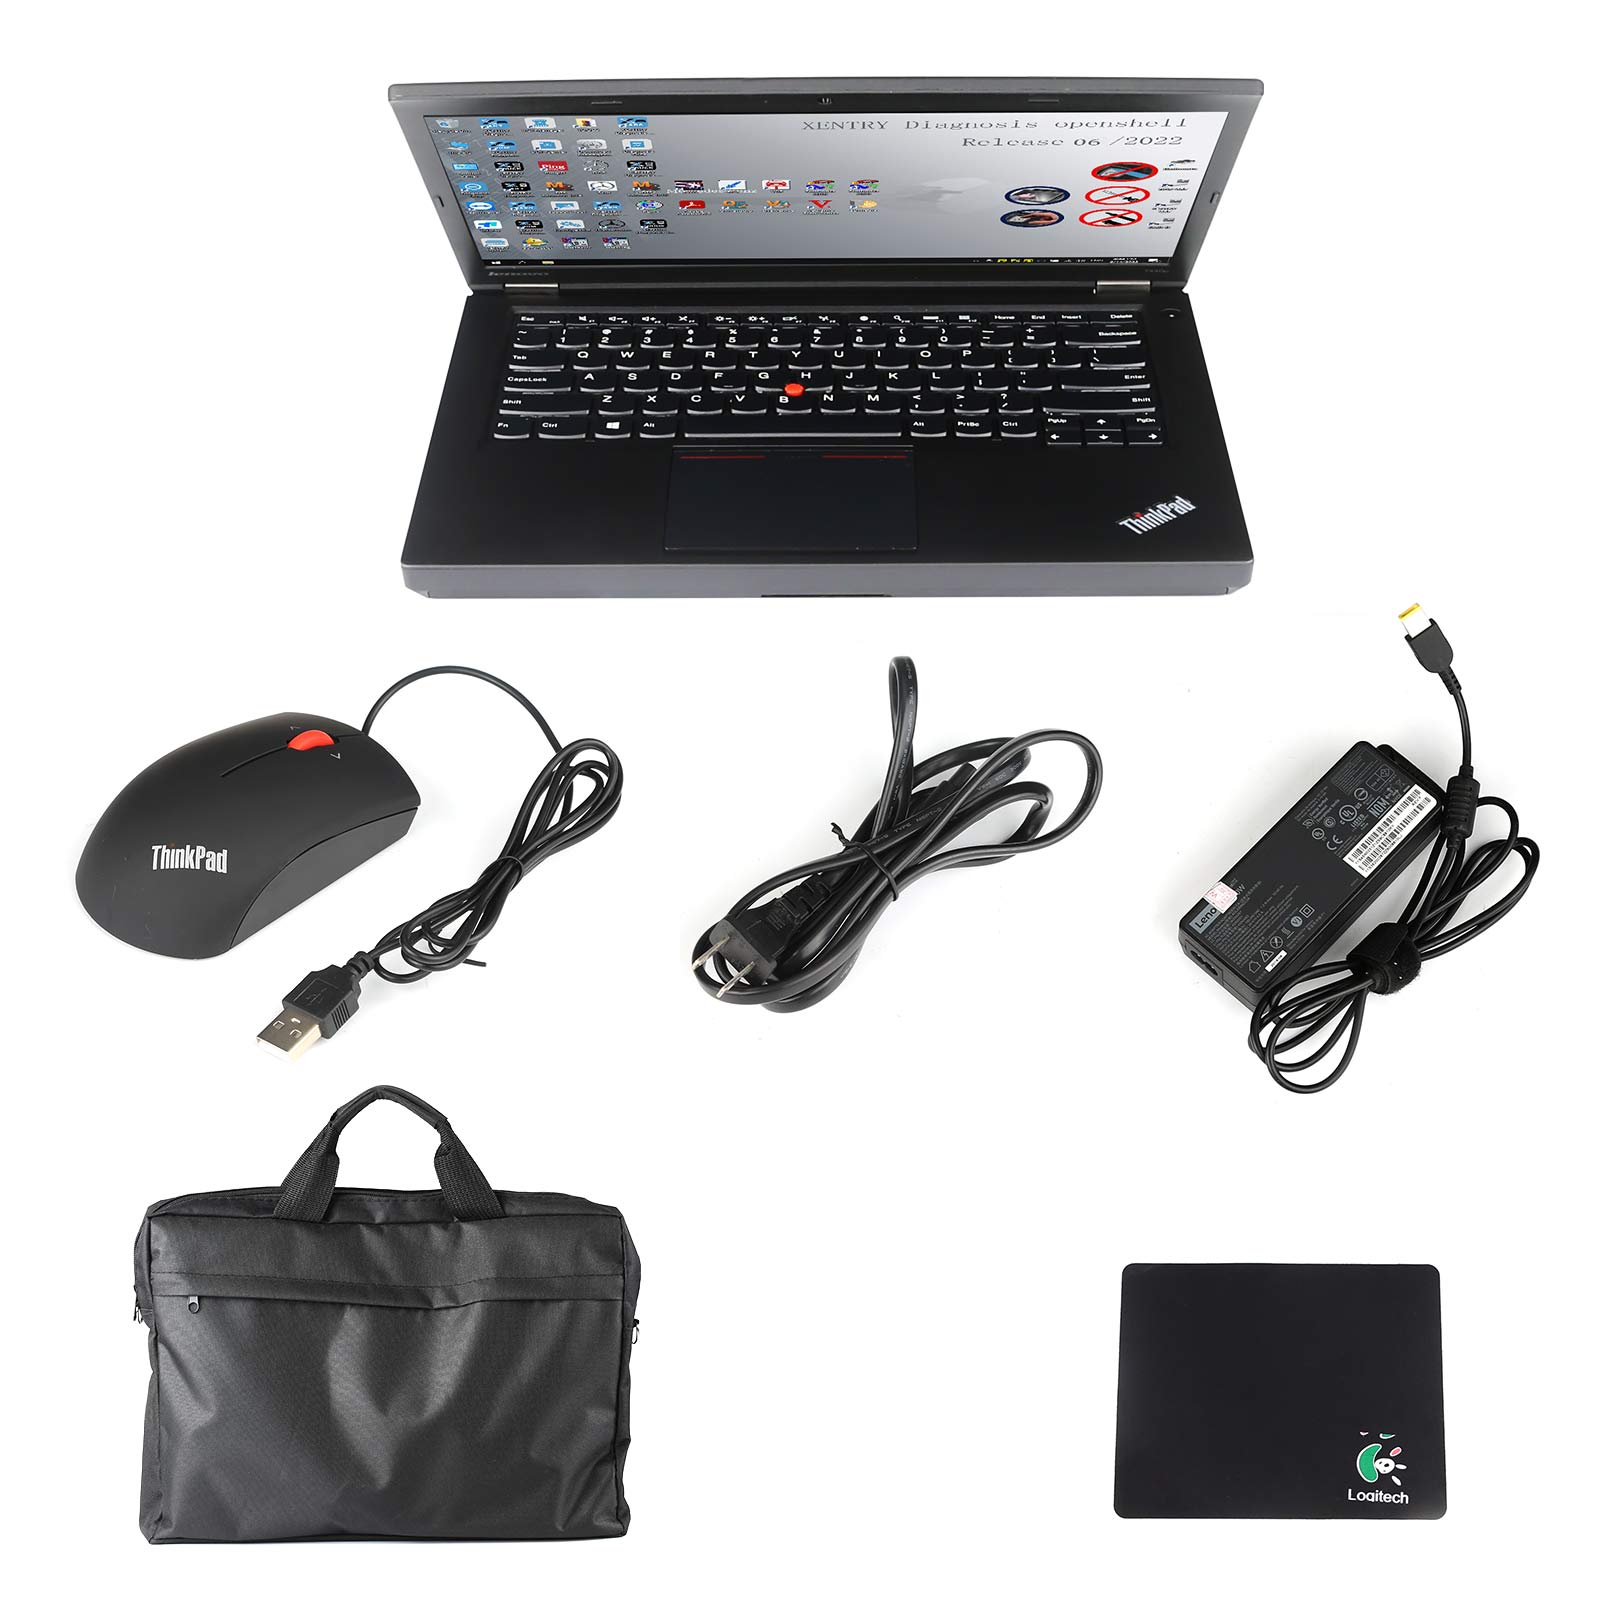 V2022.12 MB SD C4 Plus Support Doip with SSD Plus Lenovo T440P Laptop I7 8GB Laptop Software Installed Ready to Use